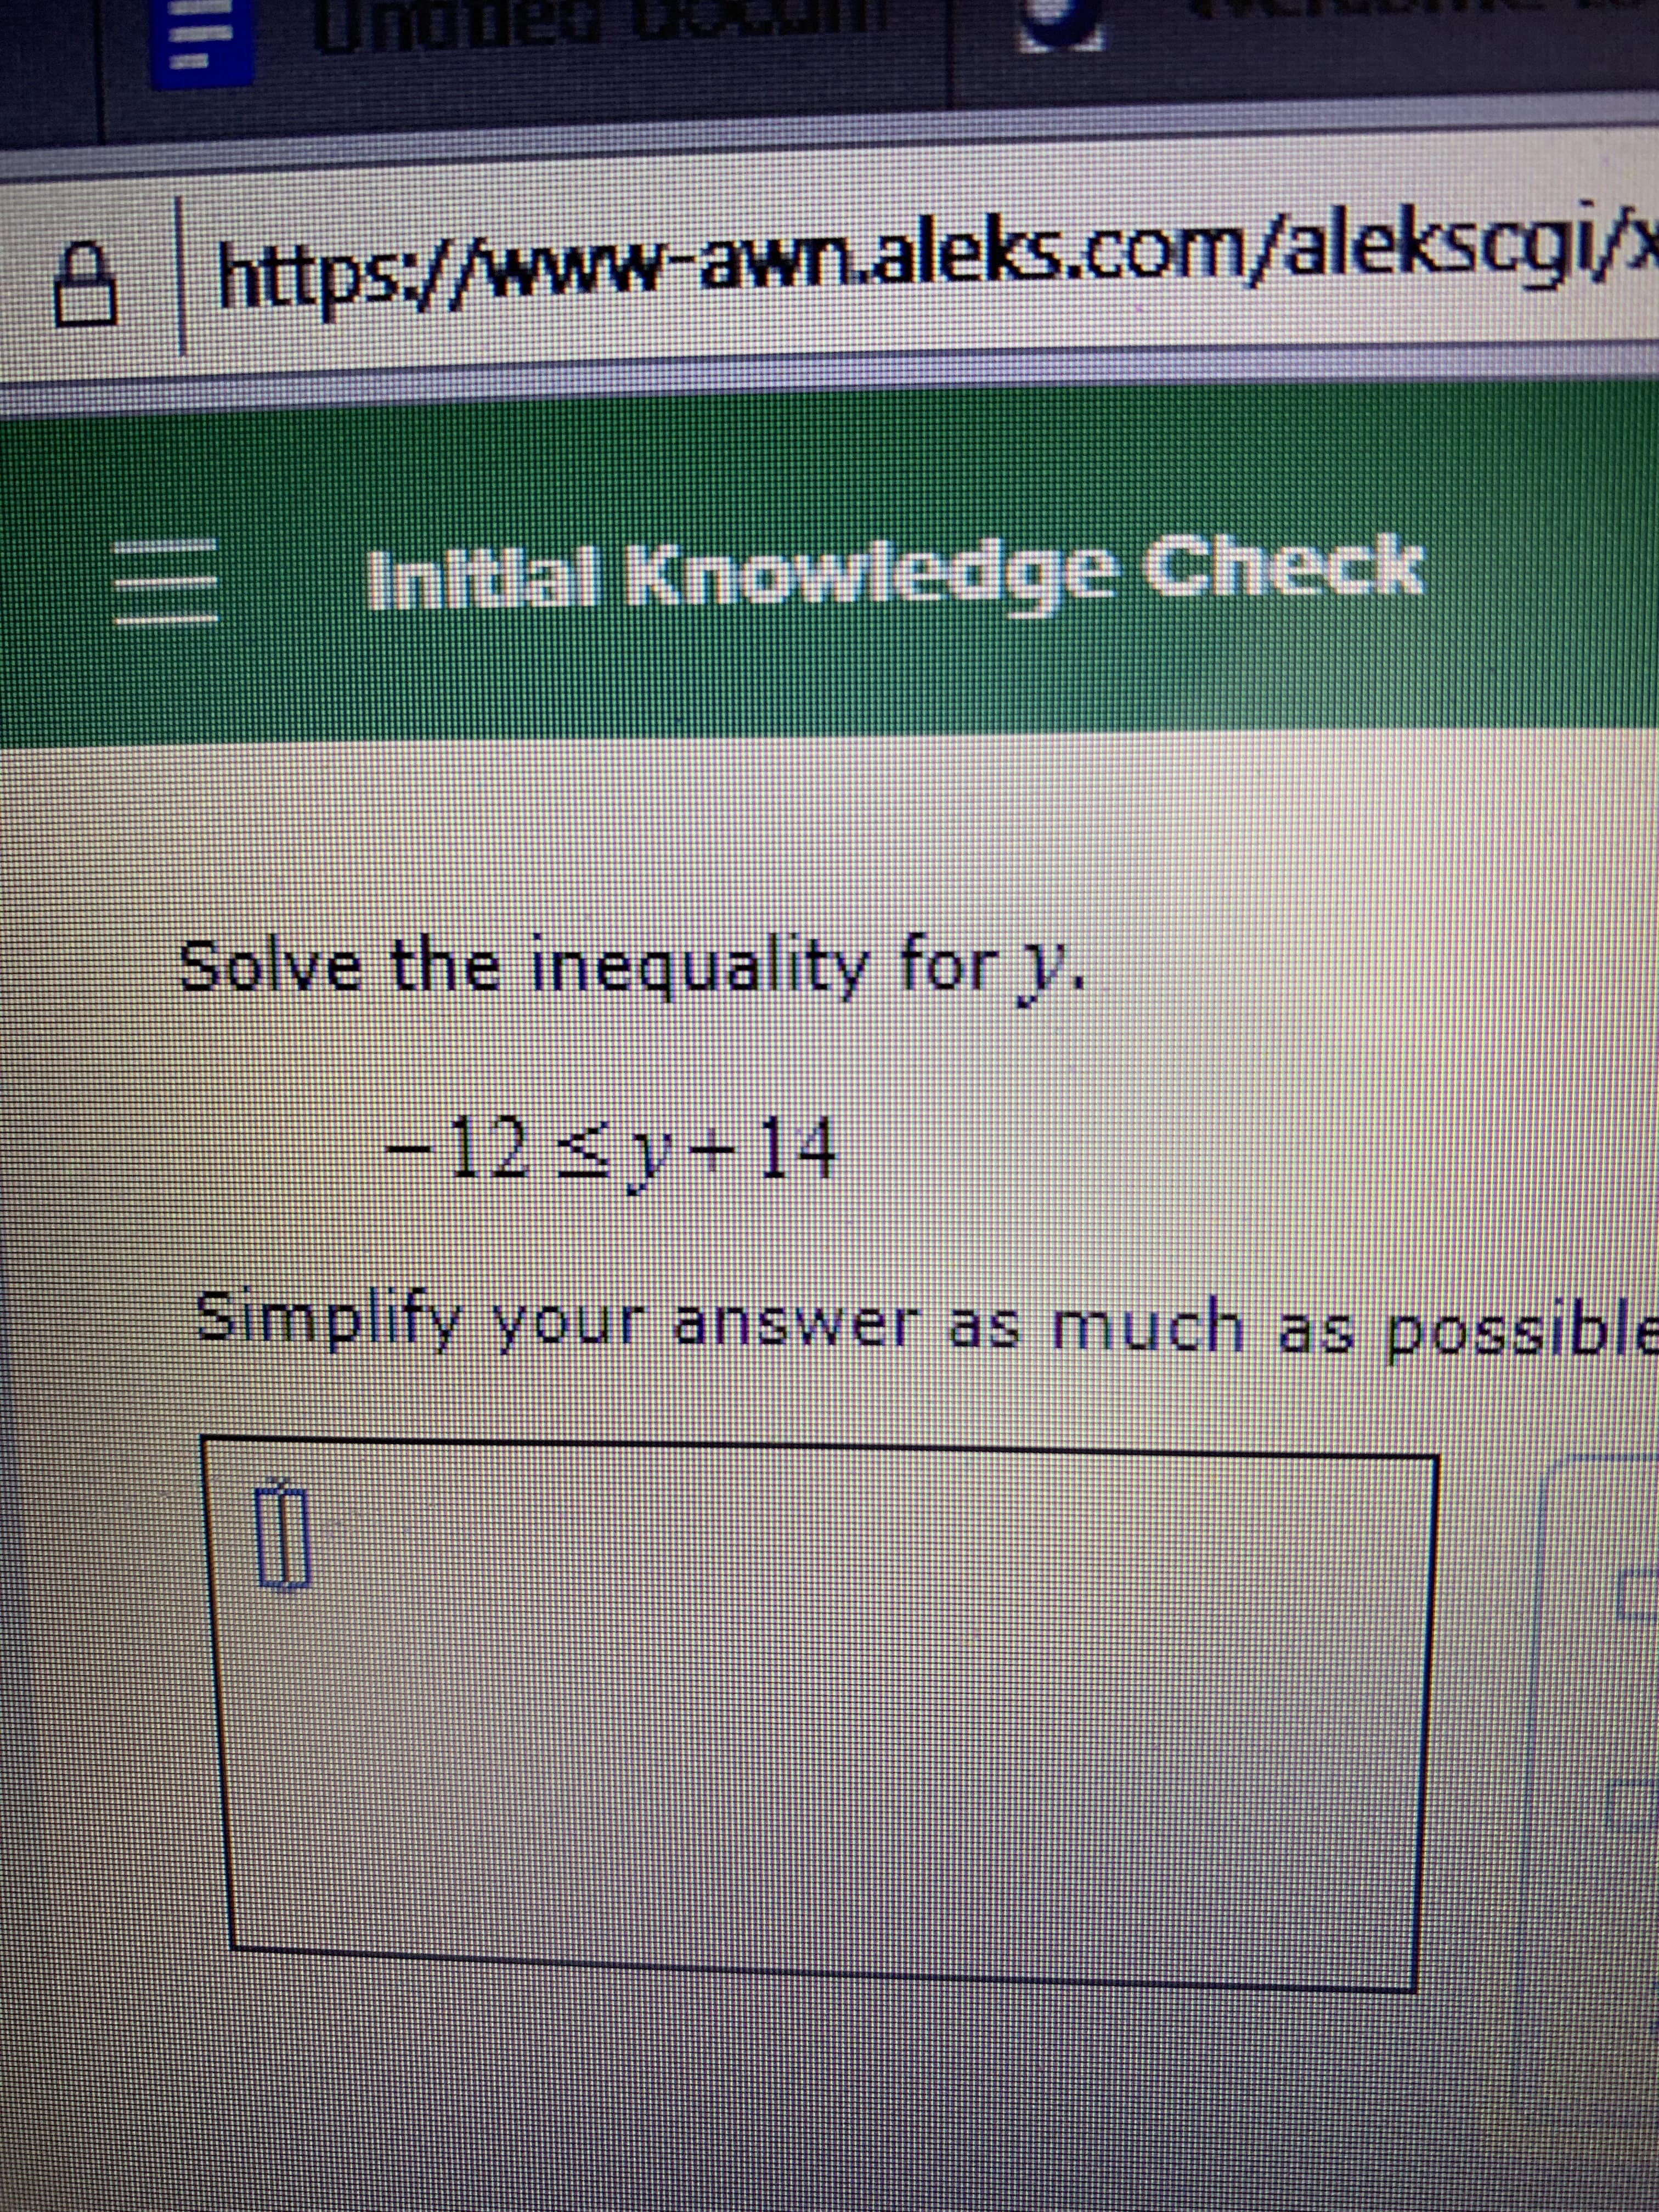 Dnudeo
https://www awnaleks.com/alekscqi
Inltlal Knowiedge Check
Solve the inequality for y.
-12 sy+14
Simplify your answer as much as possible
